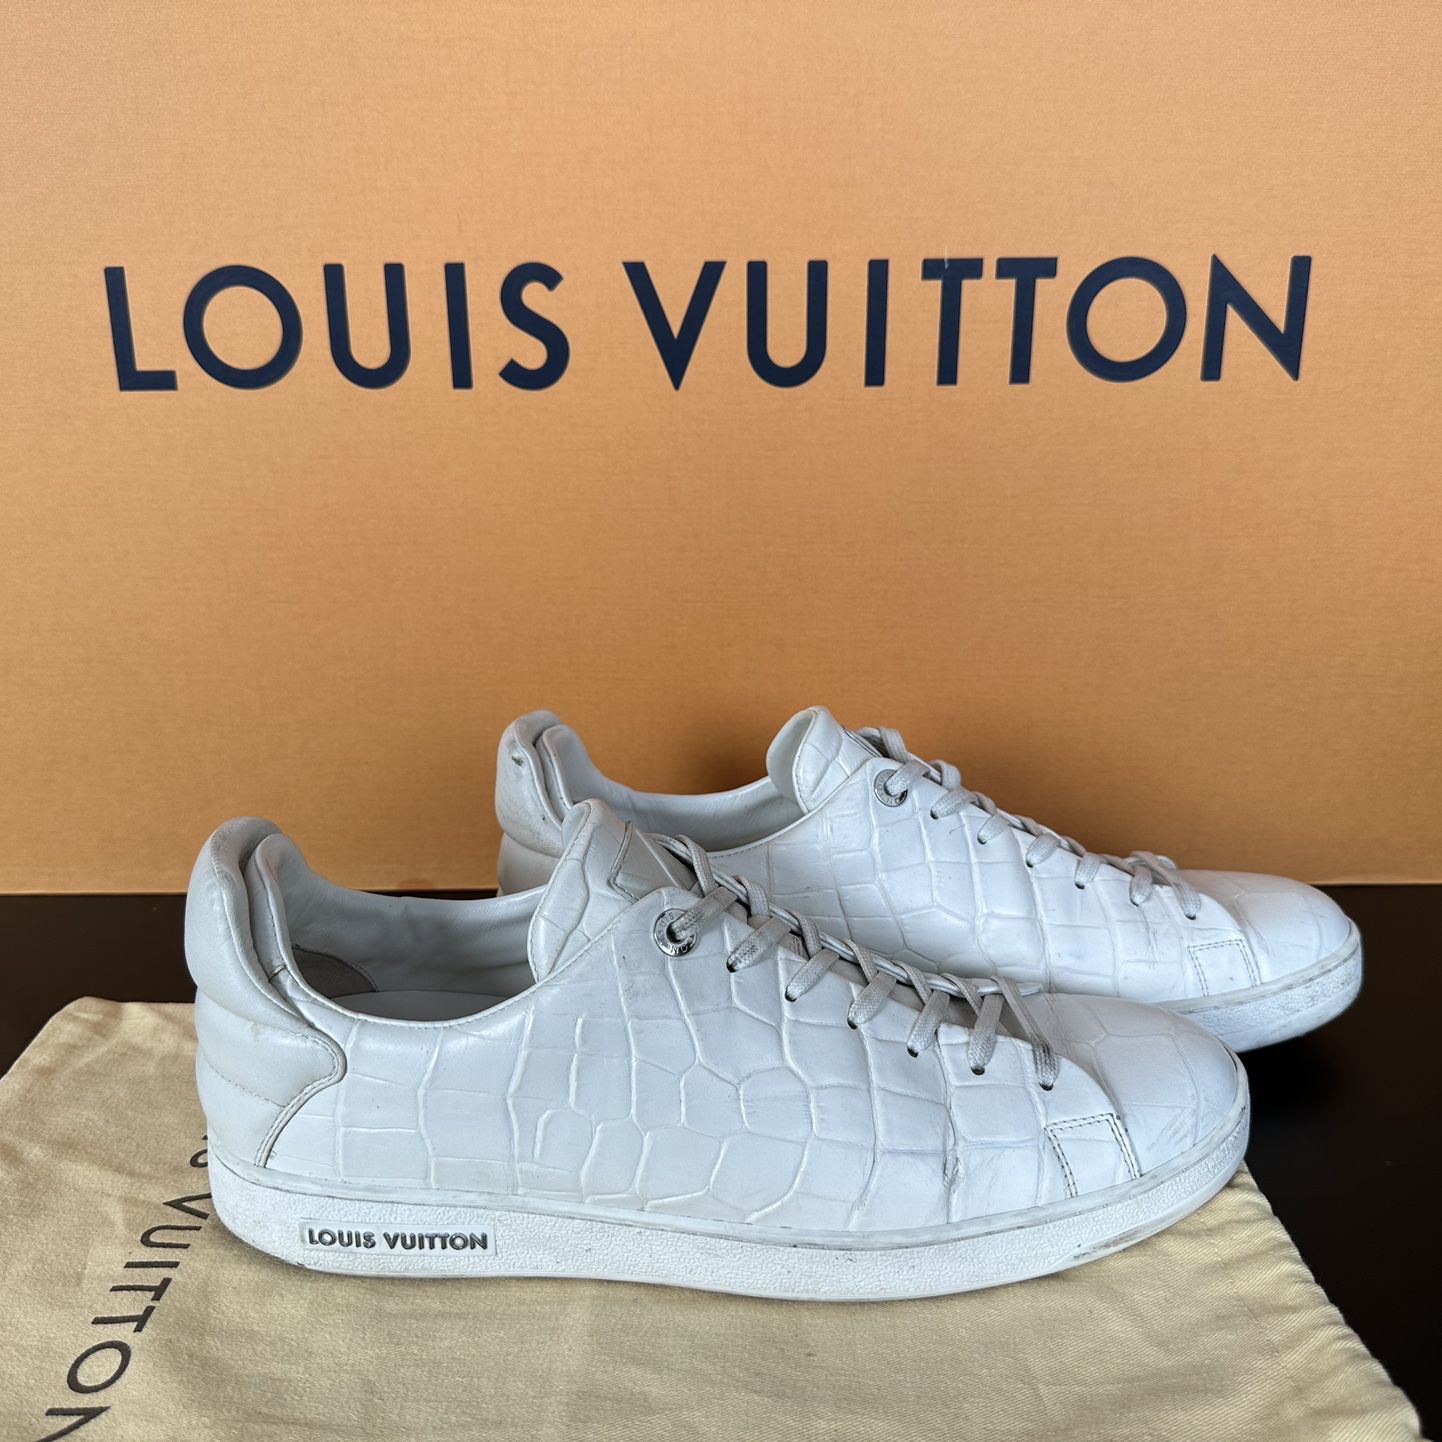 Louis Vuitton Croc Embroidered Sneakers for Sale in New York, NY